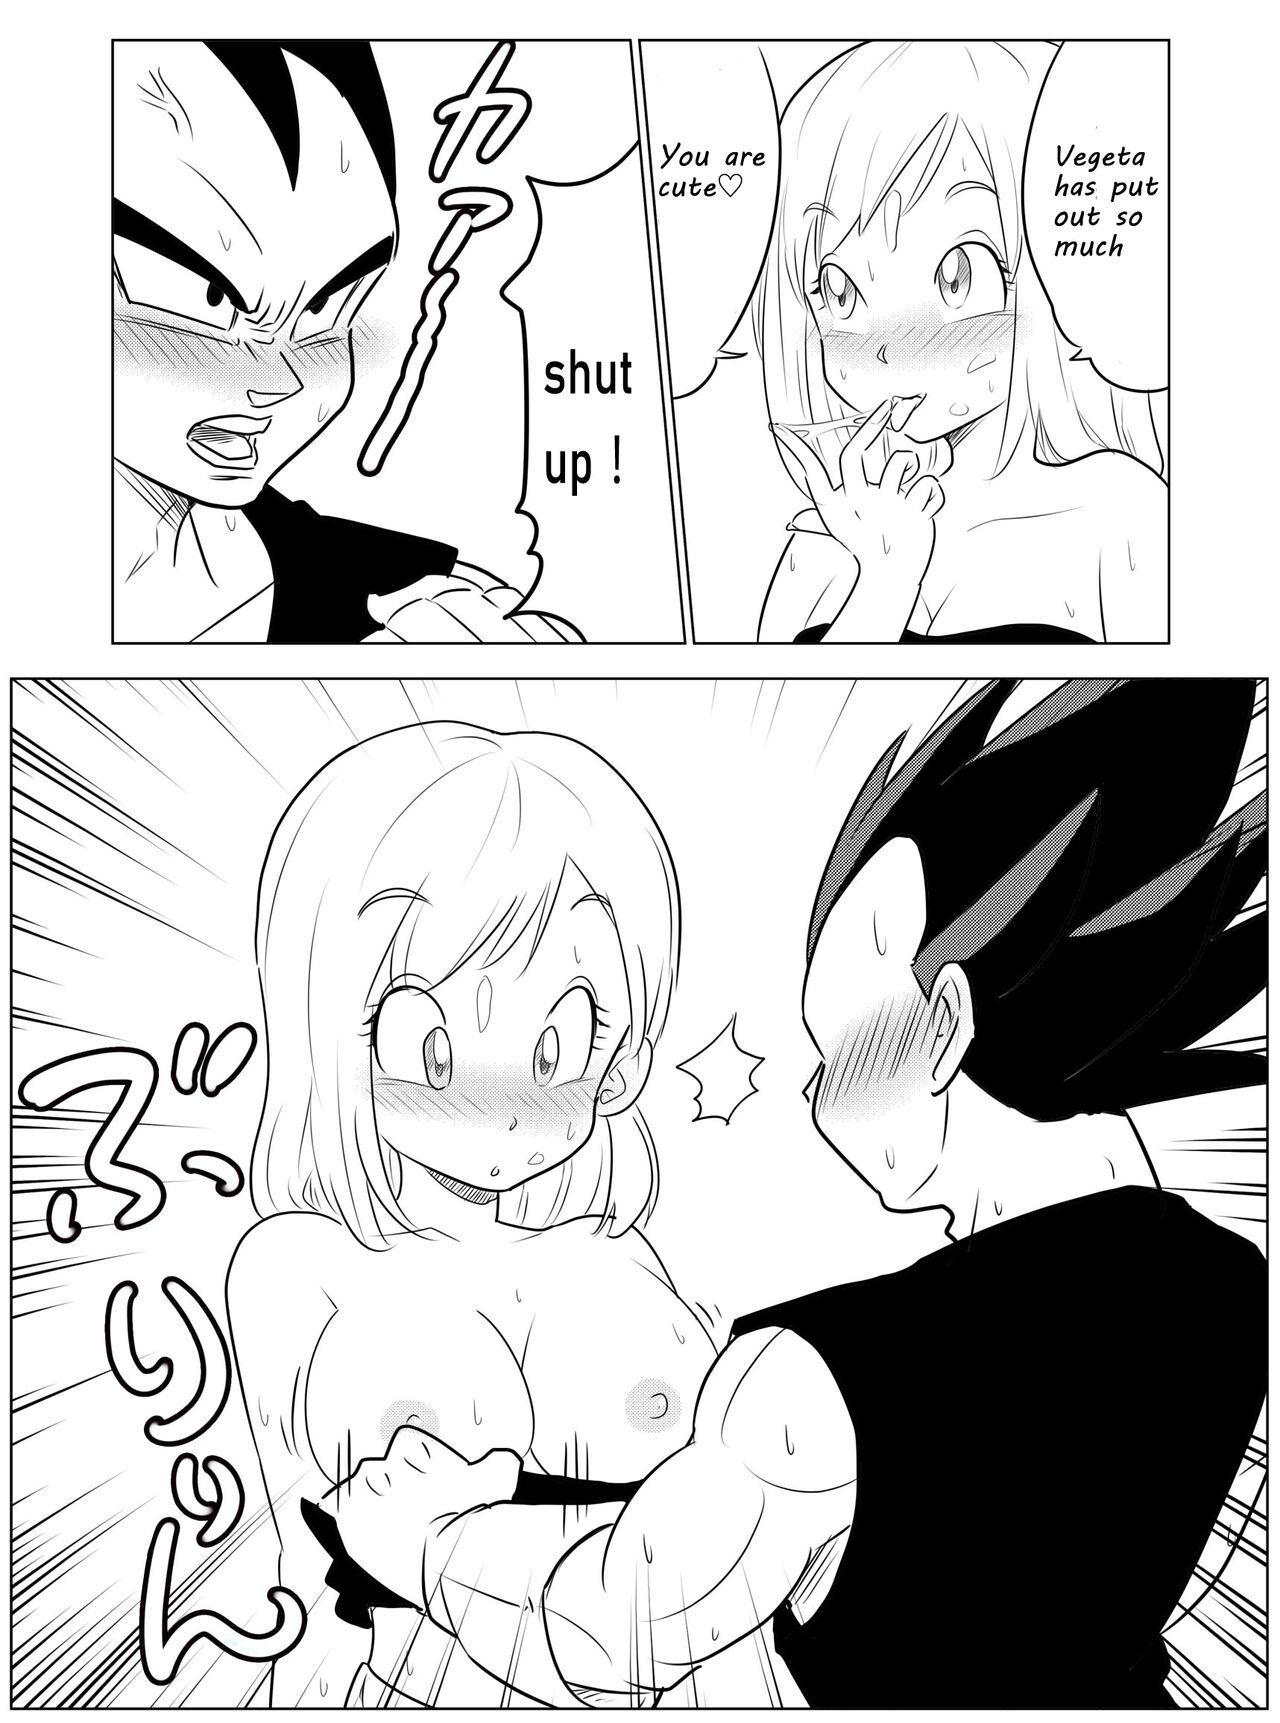 Wet Pussy Night Training - Dragon ball z Huge Tits - Page 7